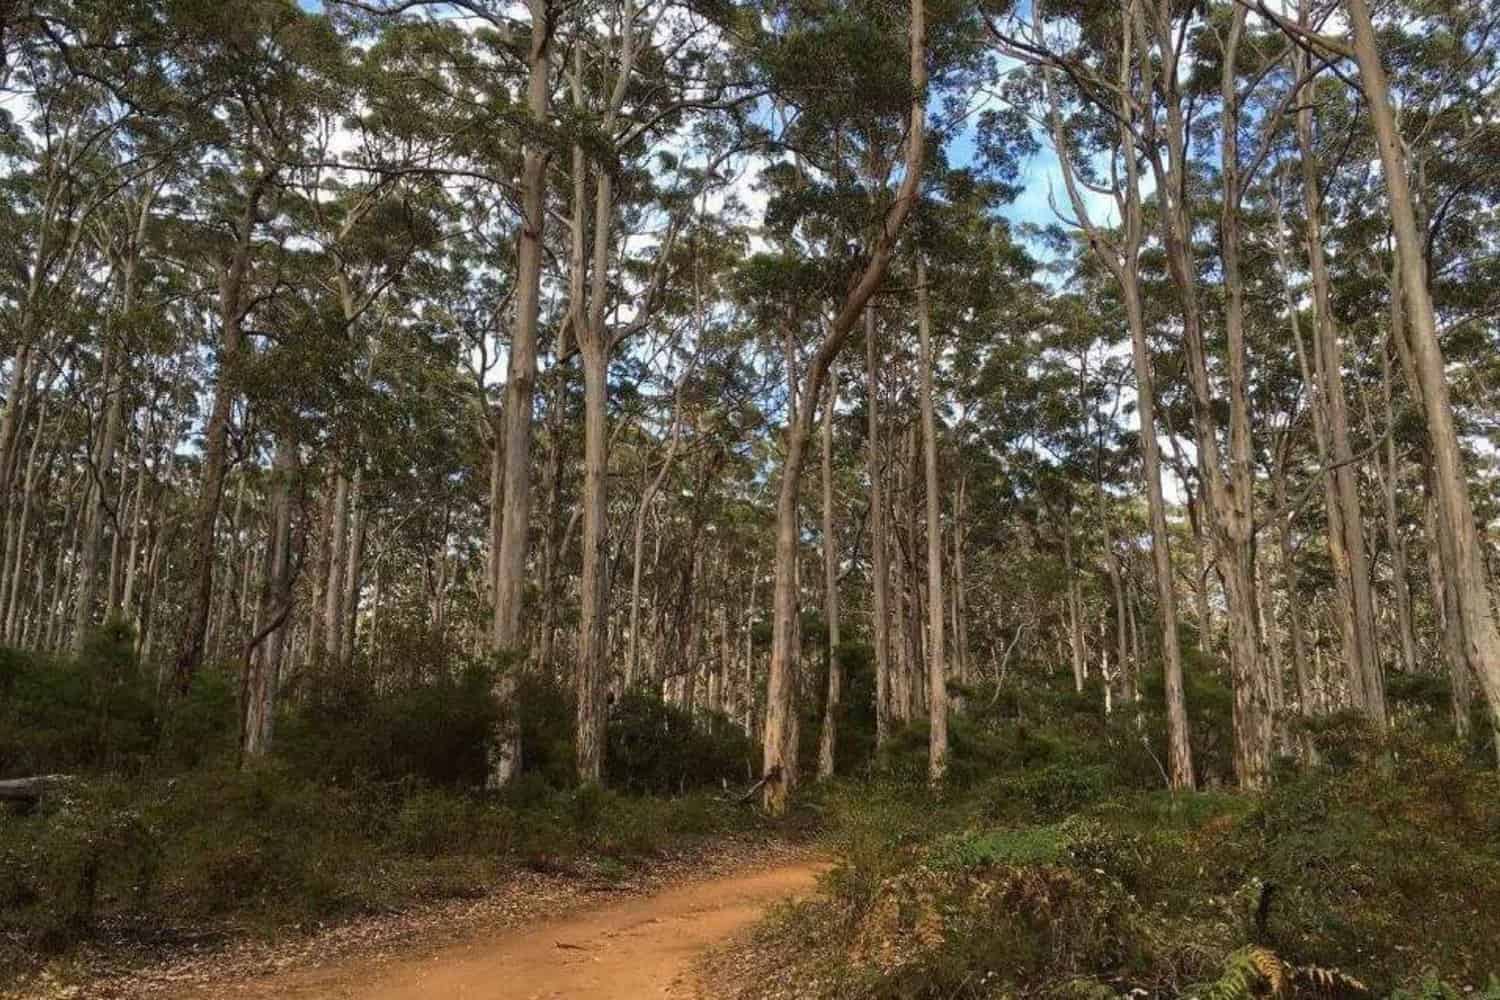 Dirt path winding through the towering eucalyptus trees of a Margaret River forest, a sanctuary for native flora and fauna.